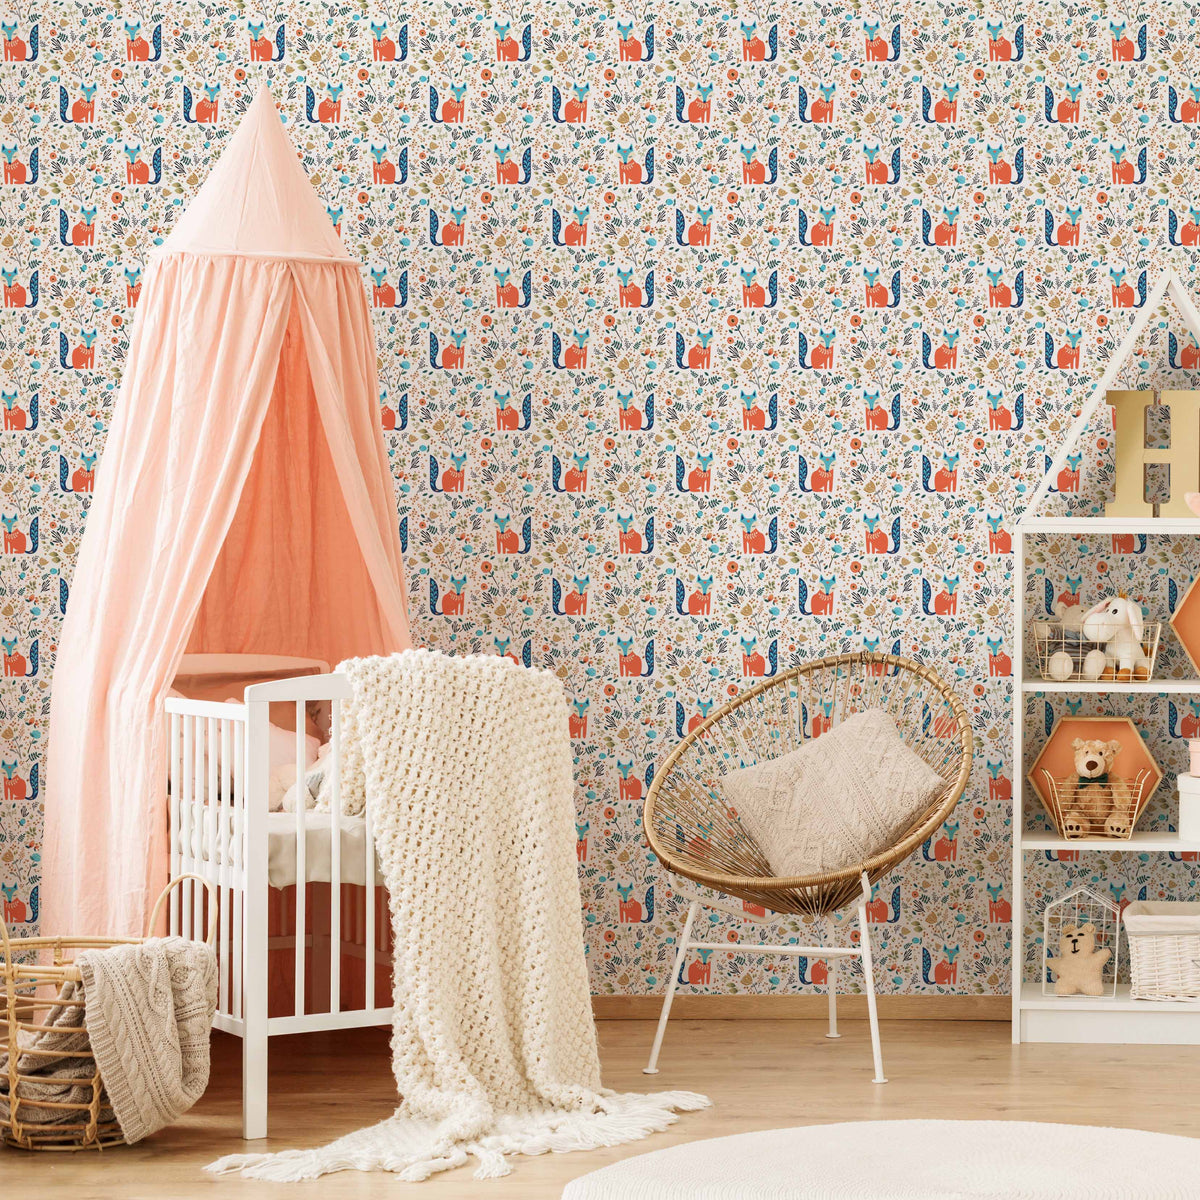 Let's Make A Den Wallpaper in Fox Orange and Sapphire Blue | Lust Home